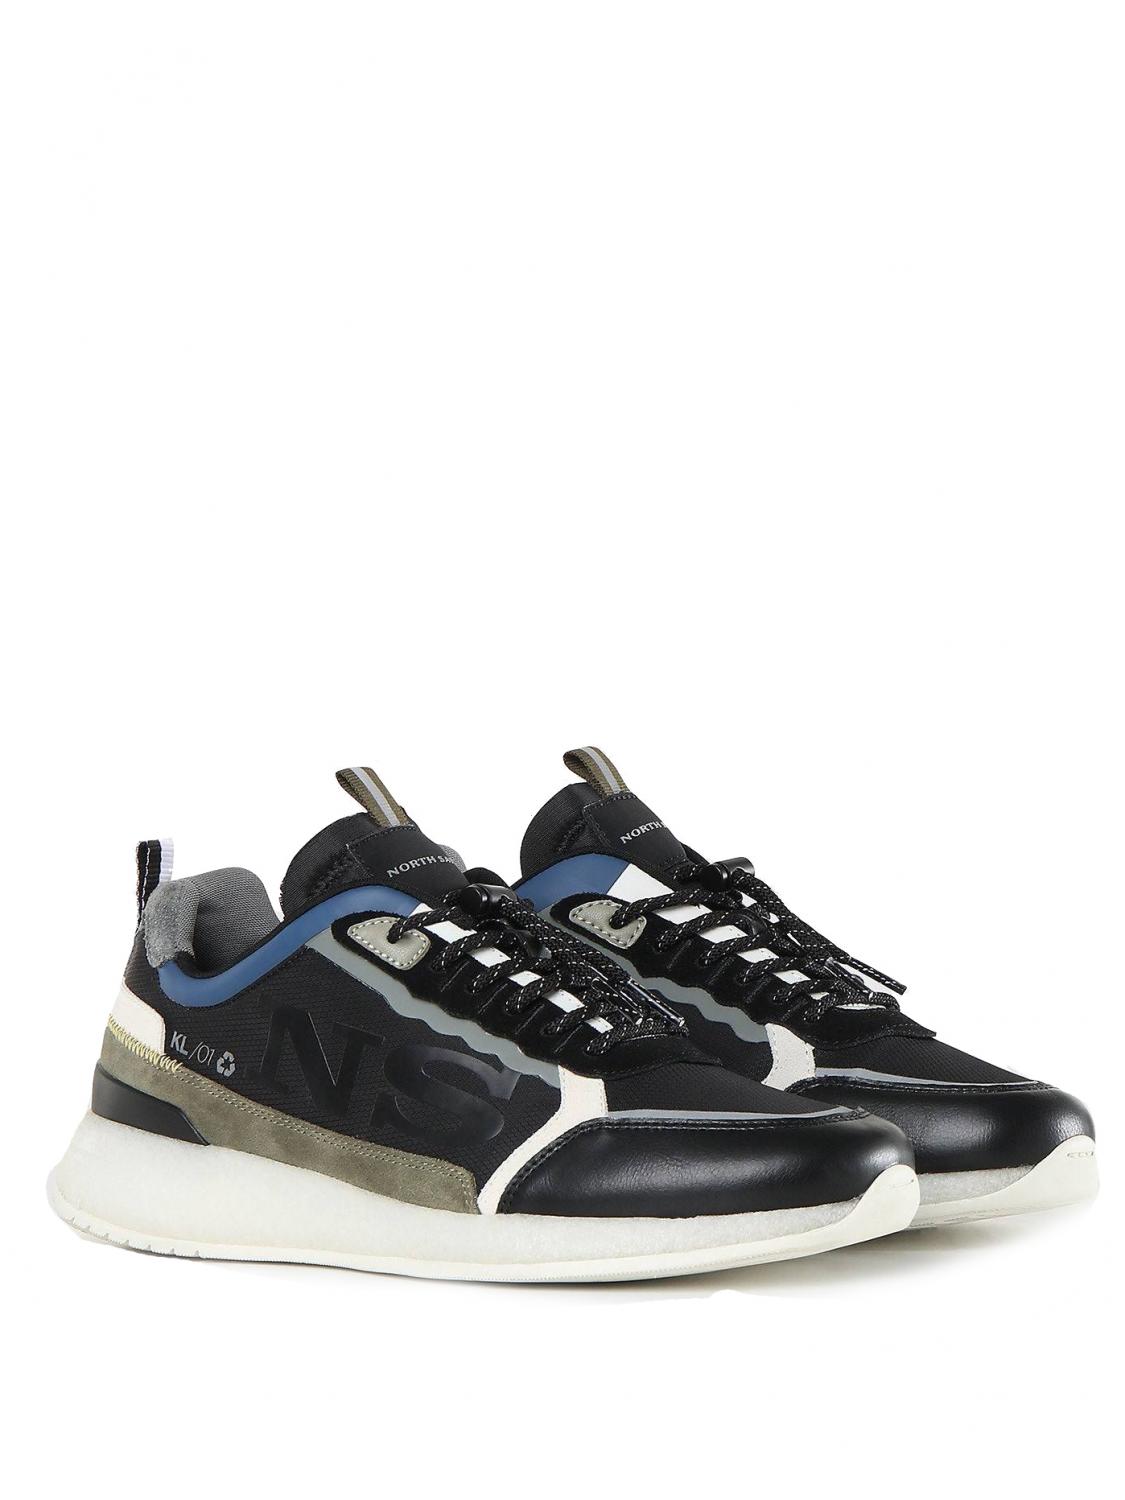 North Sails Keel Networks Sneakers Black-Multicolor - Buy At Outlet Prices!